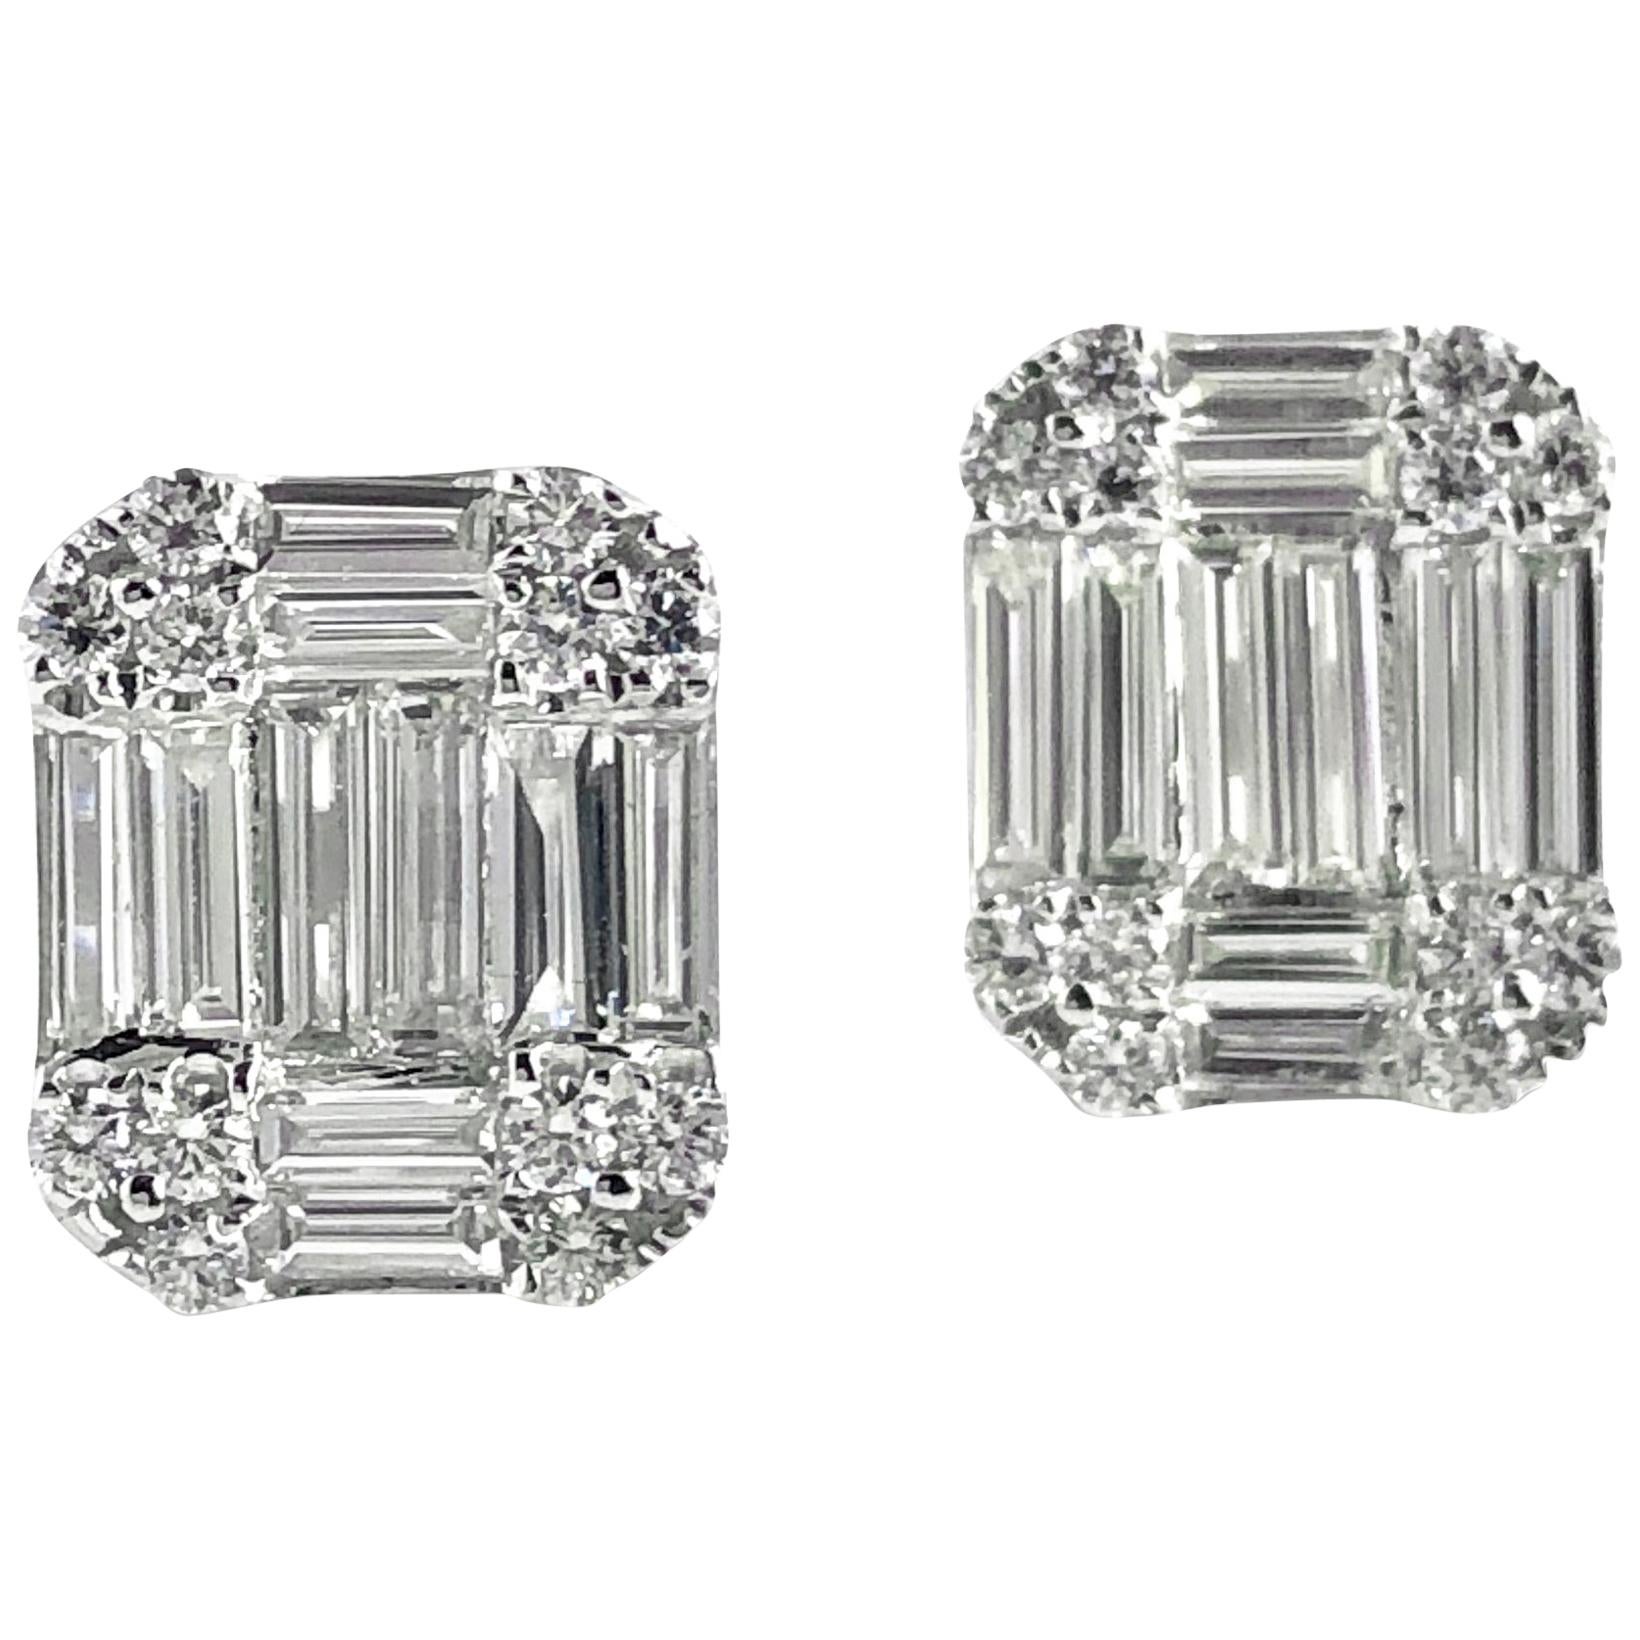 1.09 Carat Baguette and Round Diamond Stud Earrings in 18 Karat White Gold